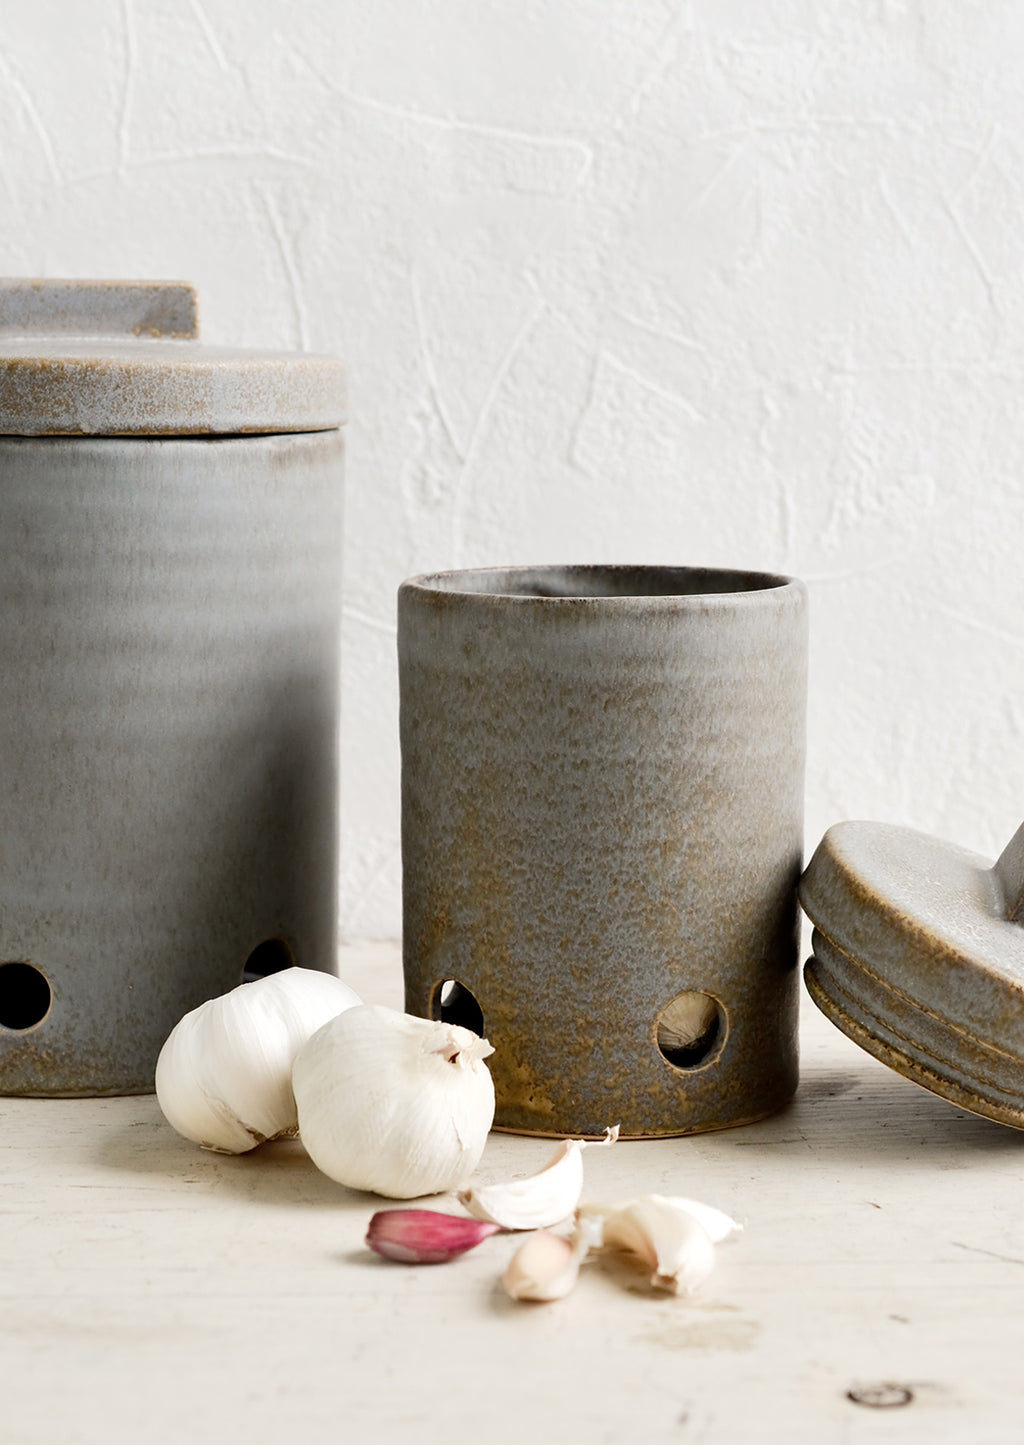 1: Ceramic kitchen storage jars in two sizes intended for onion and garlic storage.